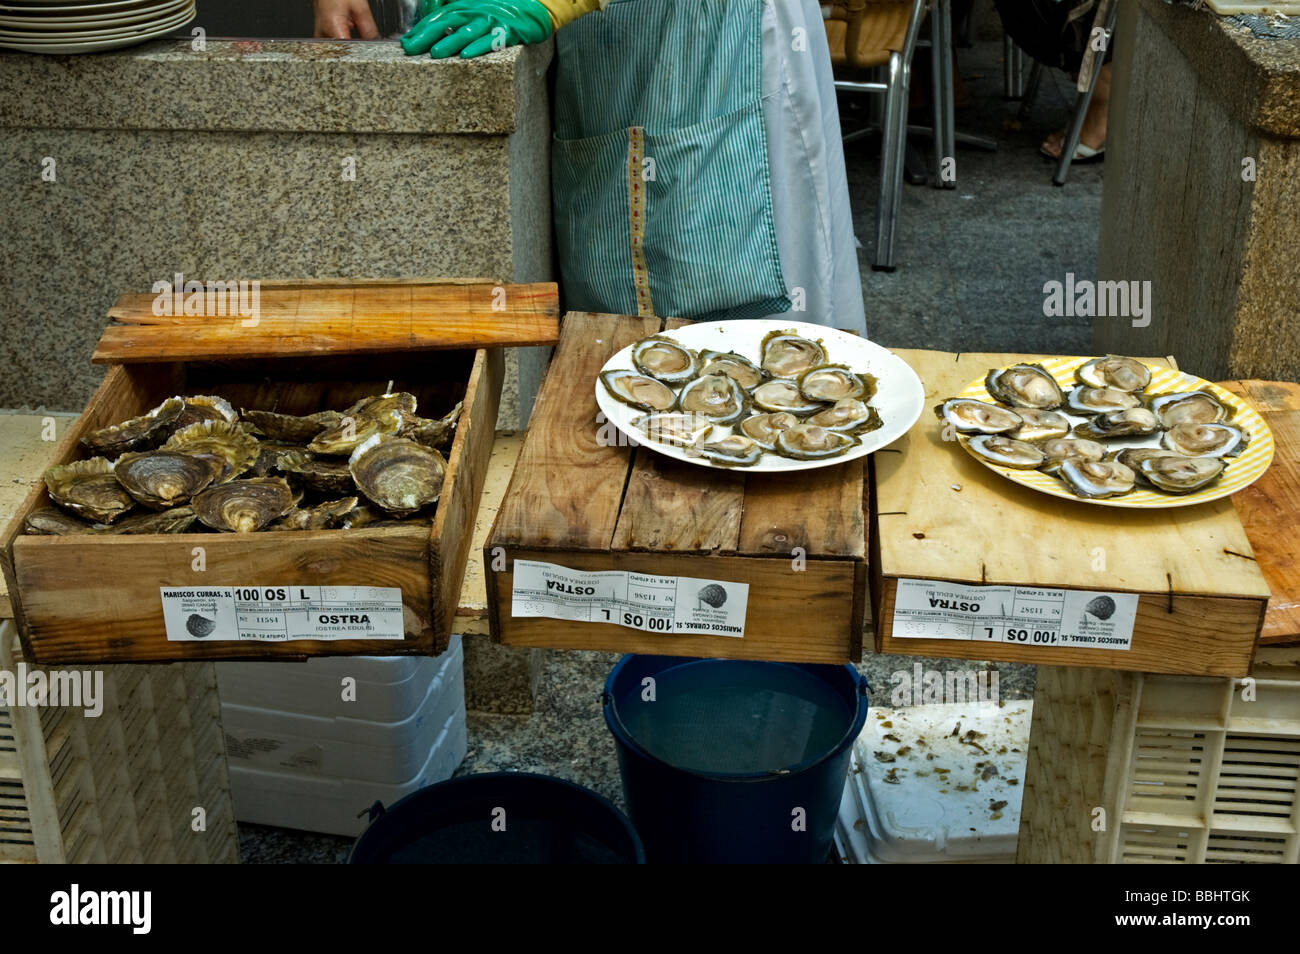 Oysters displayed for sale outside a Spanish restaurant in Vigo Stock Photo